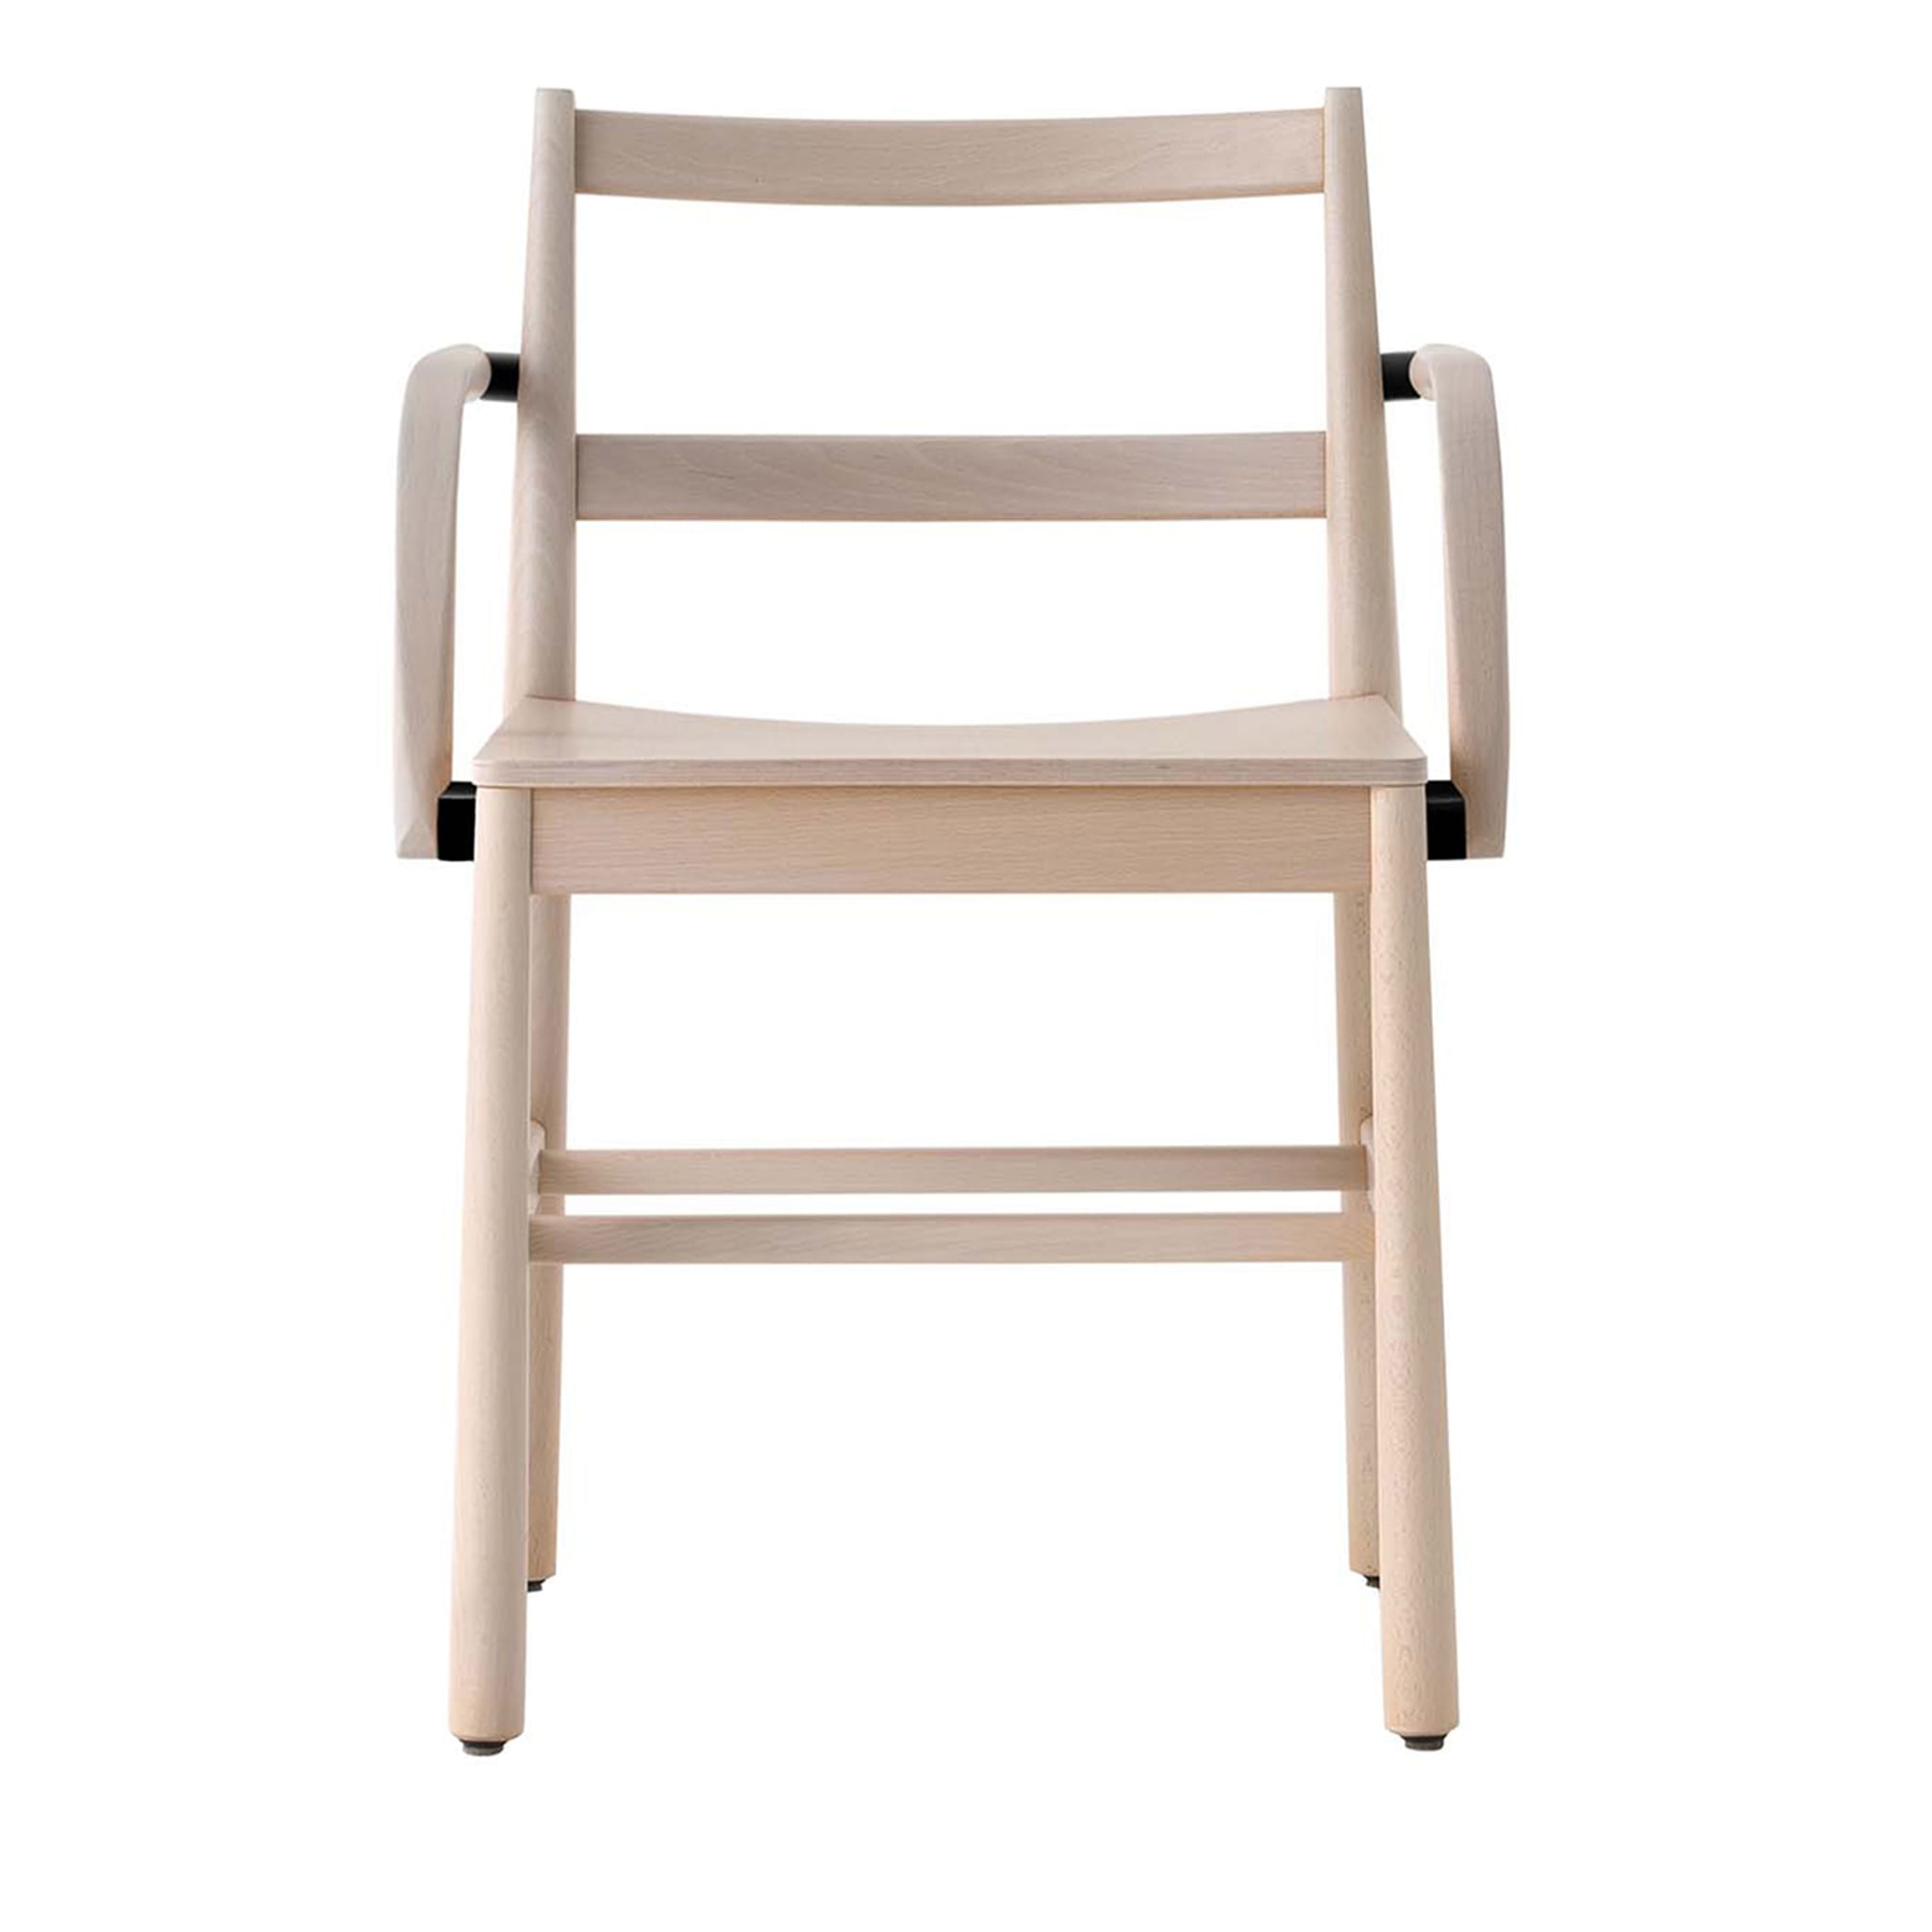 Julie Bleached Wood chair with armrests by Emilio Nanni - Main view